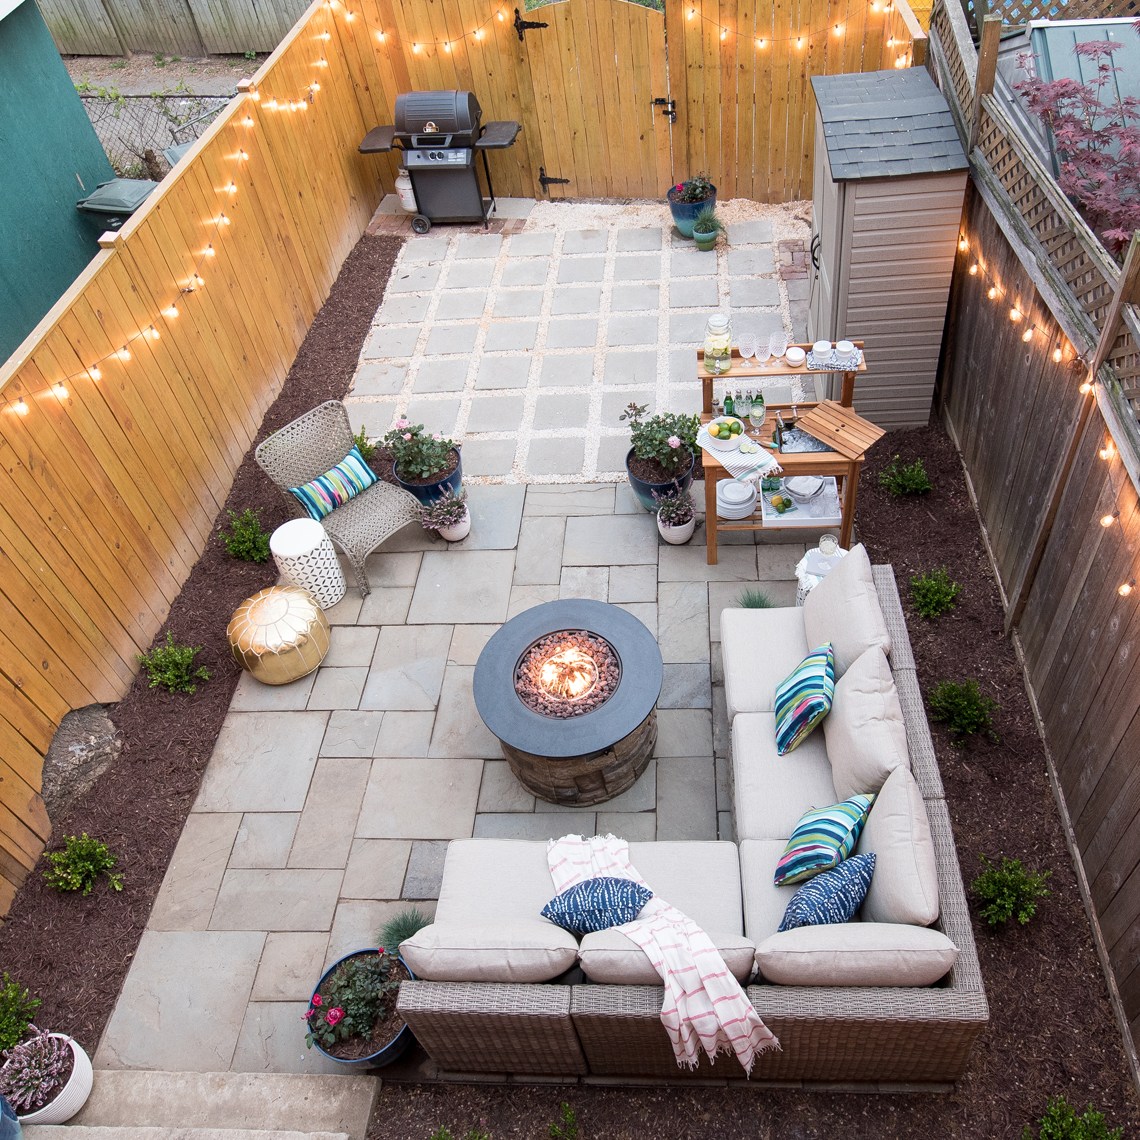 An aerial view of a backyard porch with a fence around the yard and lights on the fence and a round lit fire pit.